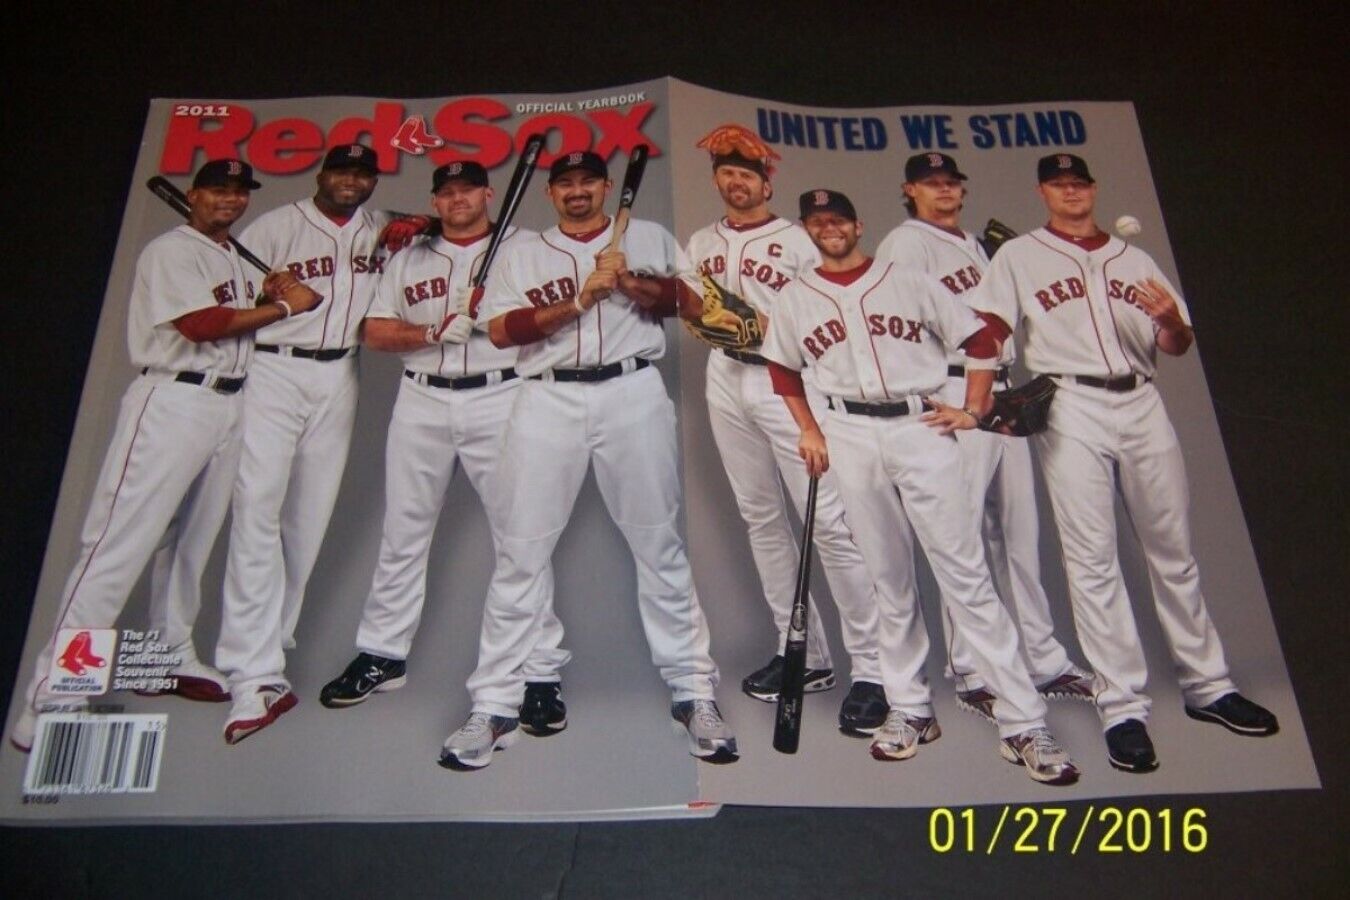 2011 BOSTON RED SOX Official Yearbook DAVID ORTIZ Kevin YOUKILLI